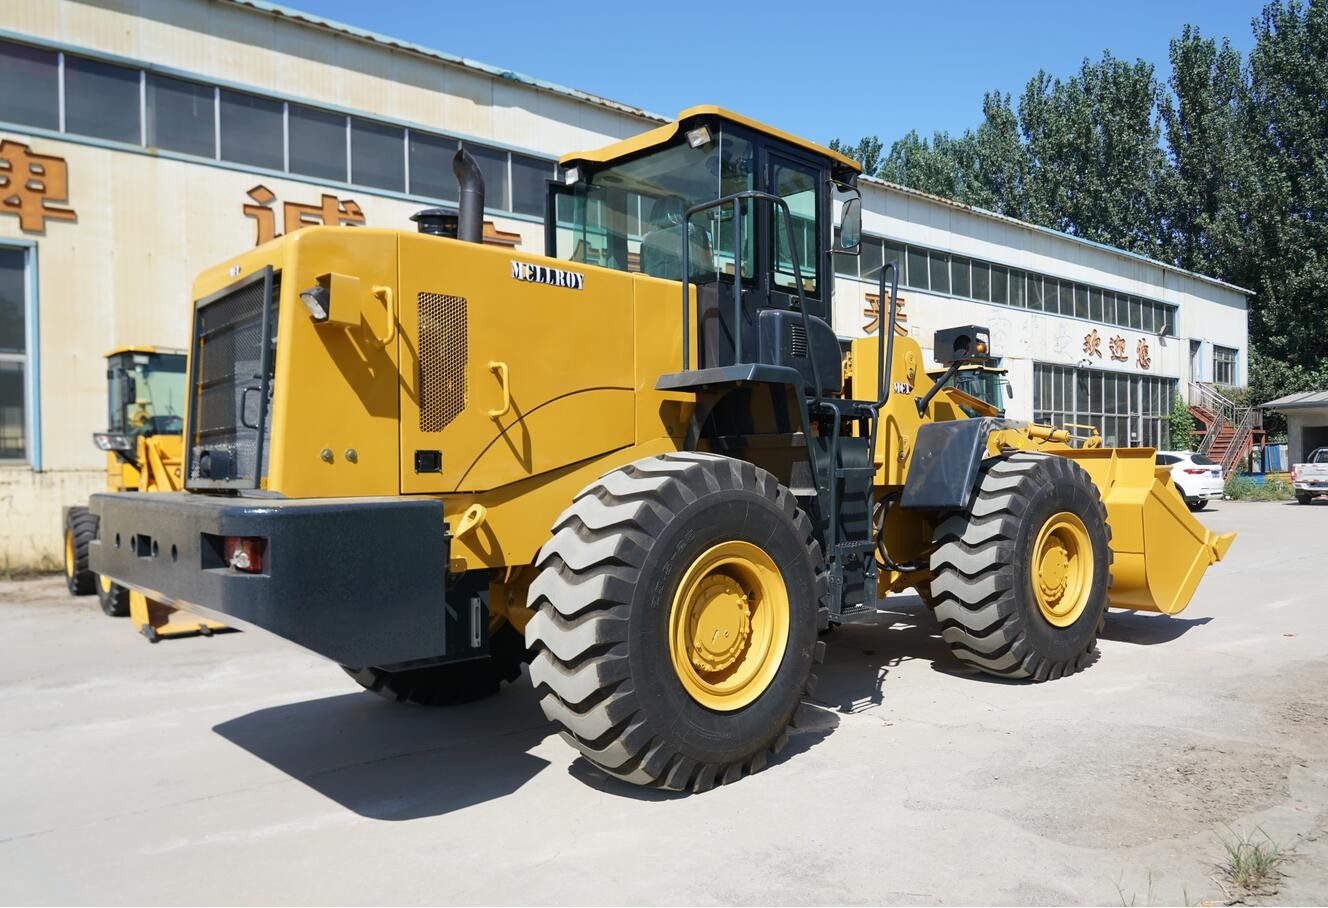 Industrial 5 Ton Wheel Loader 5000kg Rated Load For Engineering Construction